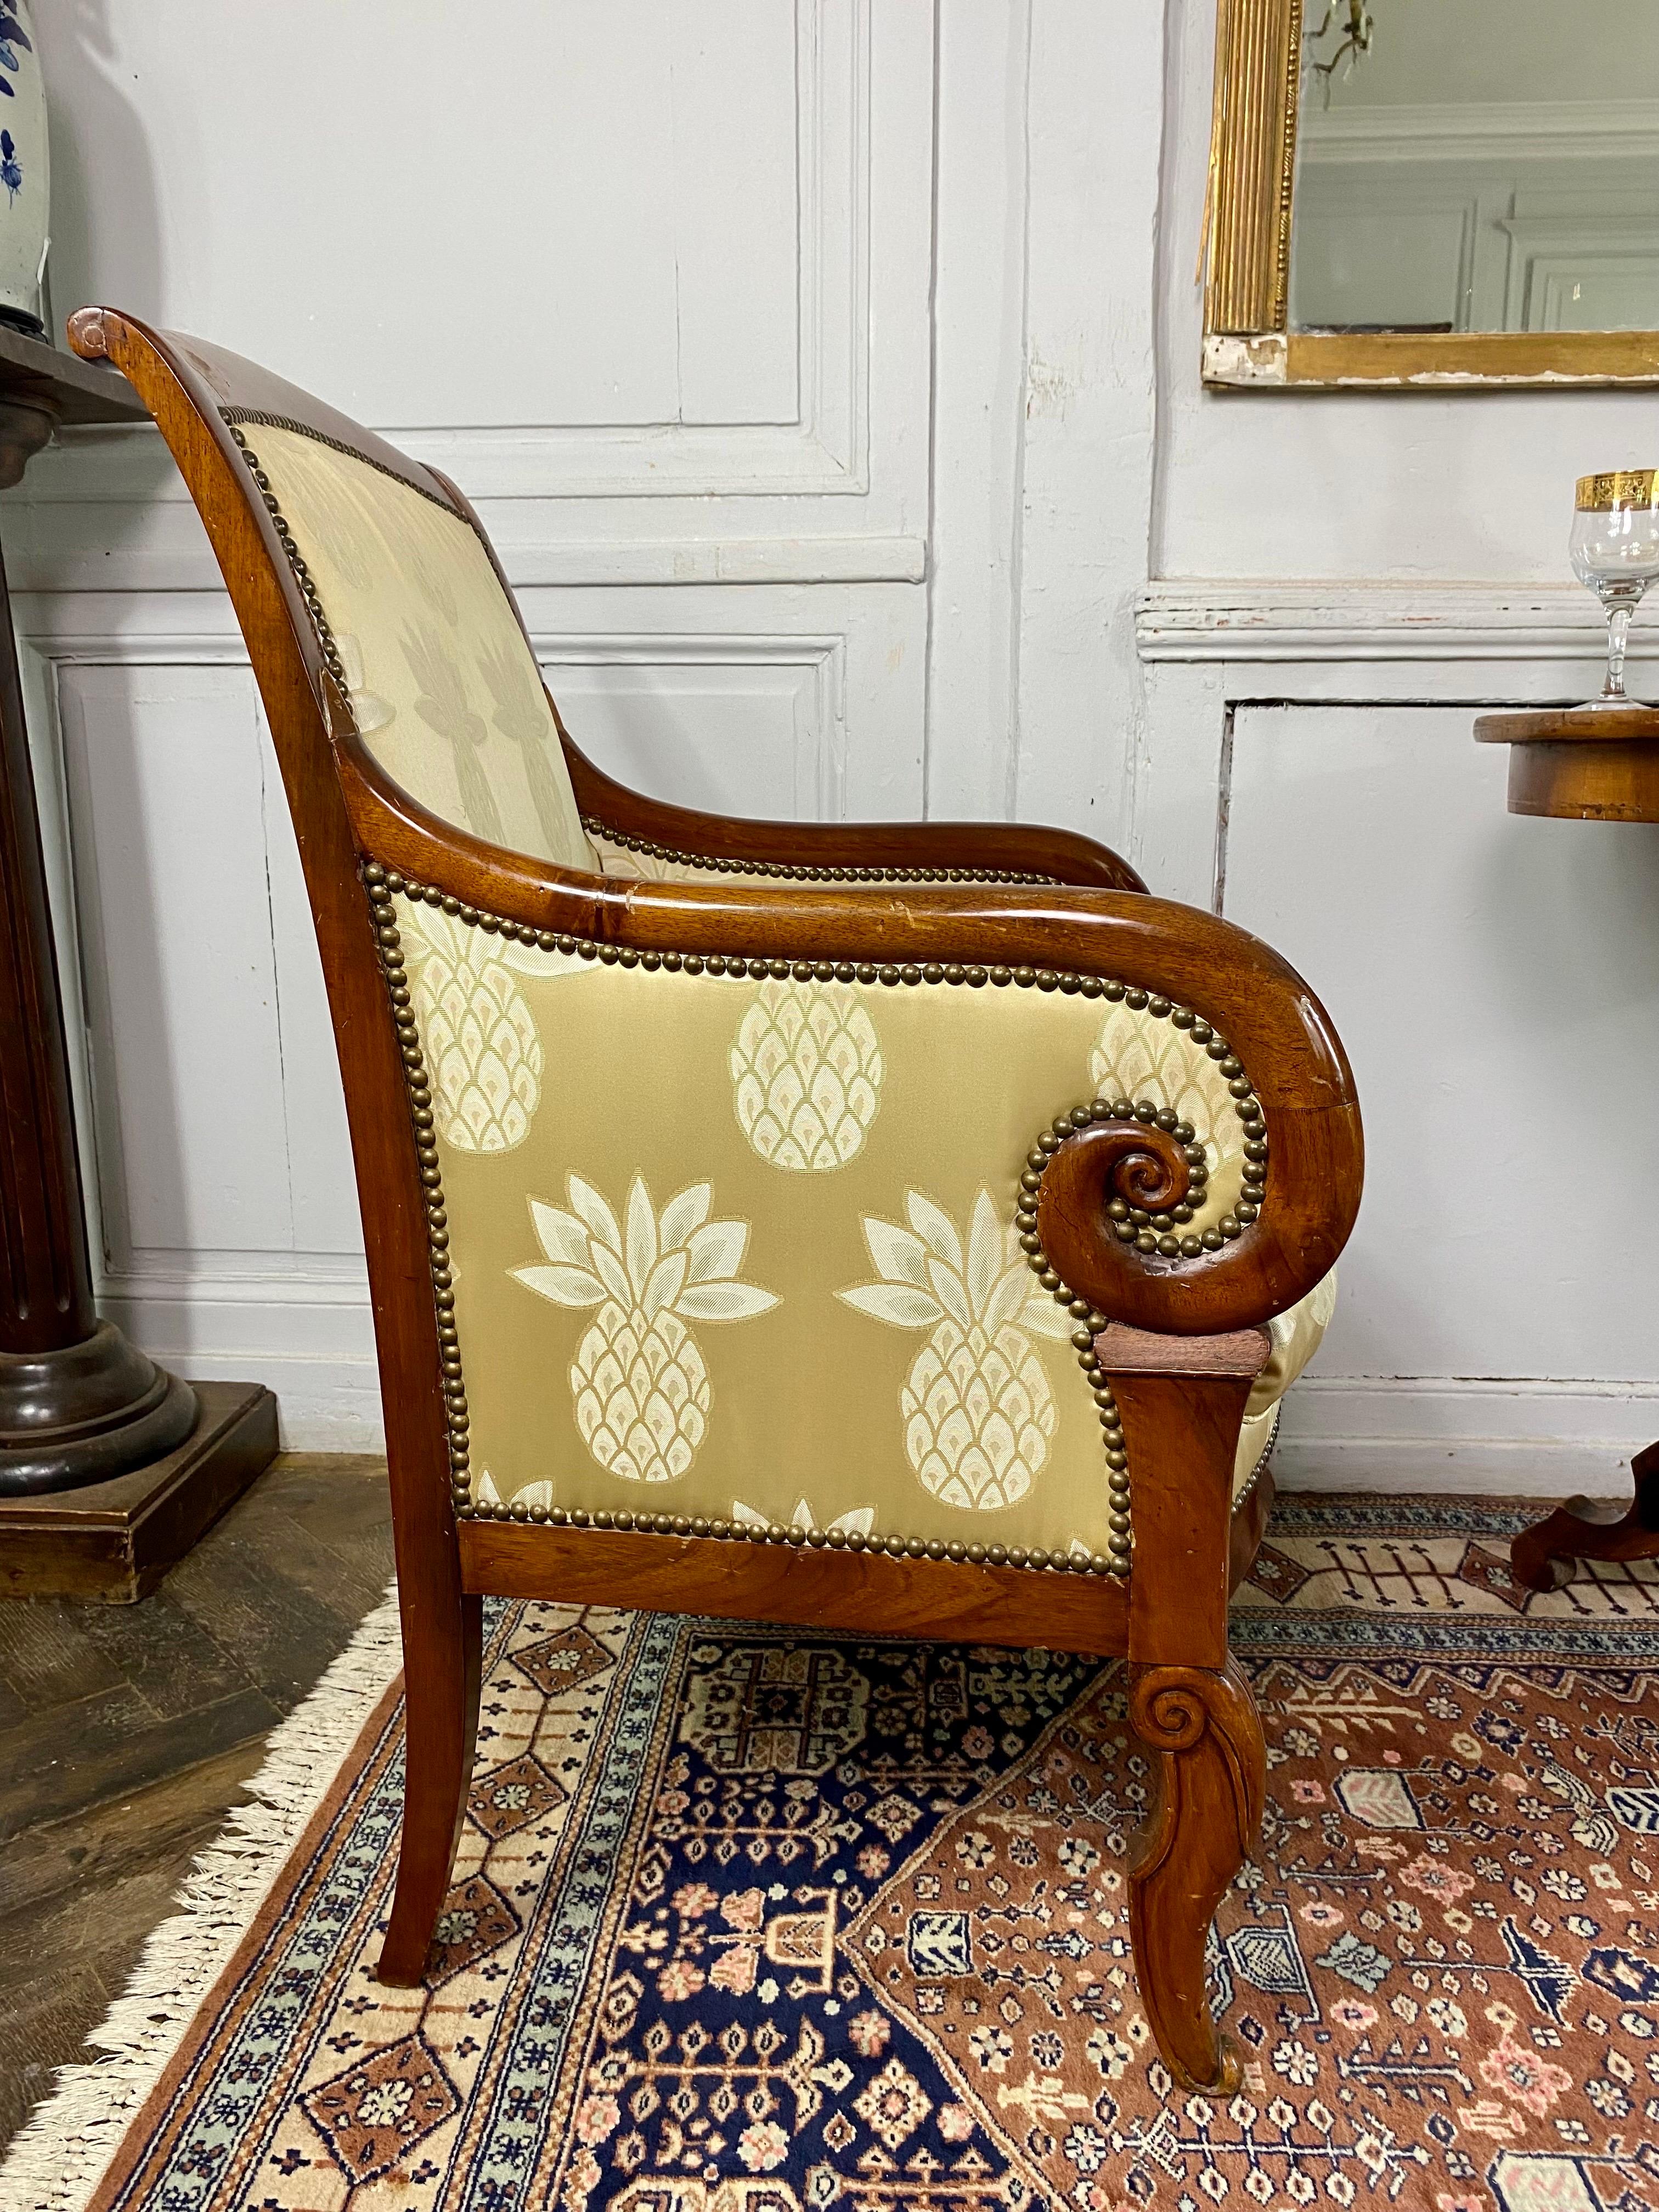 Louis Philippe Pair of Armchairs from the Louis-Philippe Period Beginning of the 19th Century